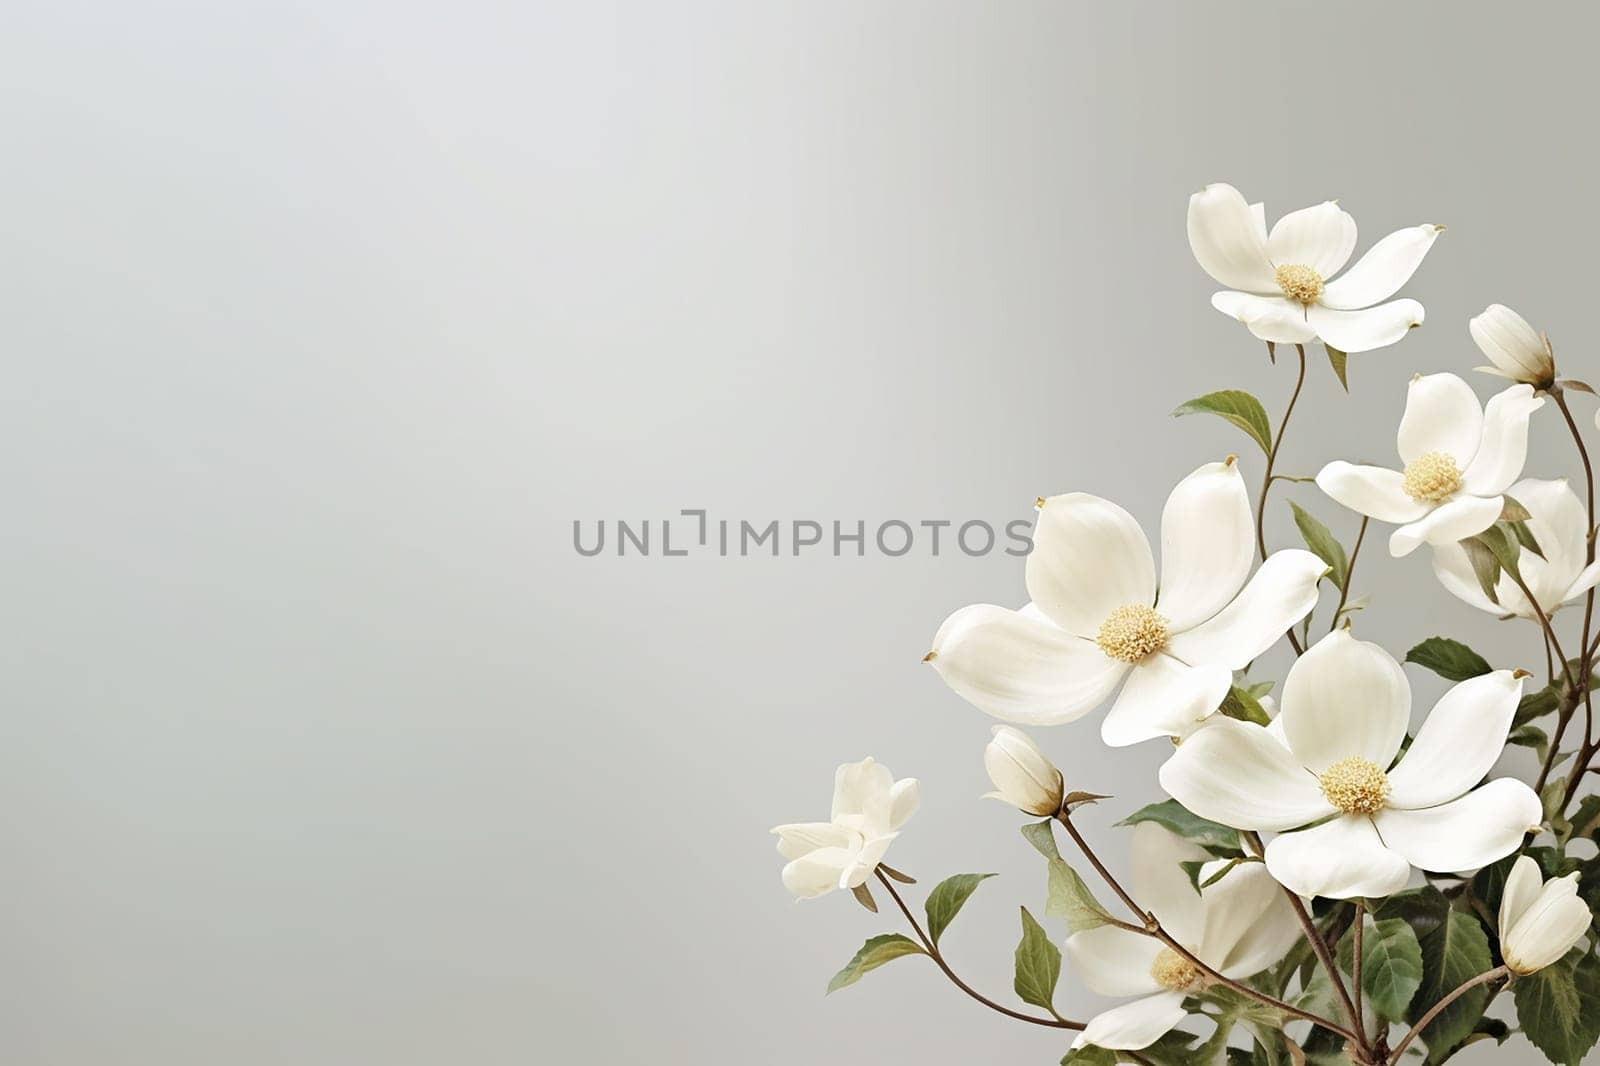 Elegant white flowers with prominent stamens against a soft grey backdrop.